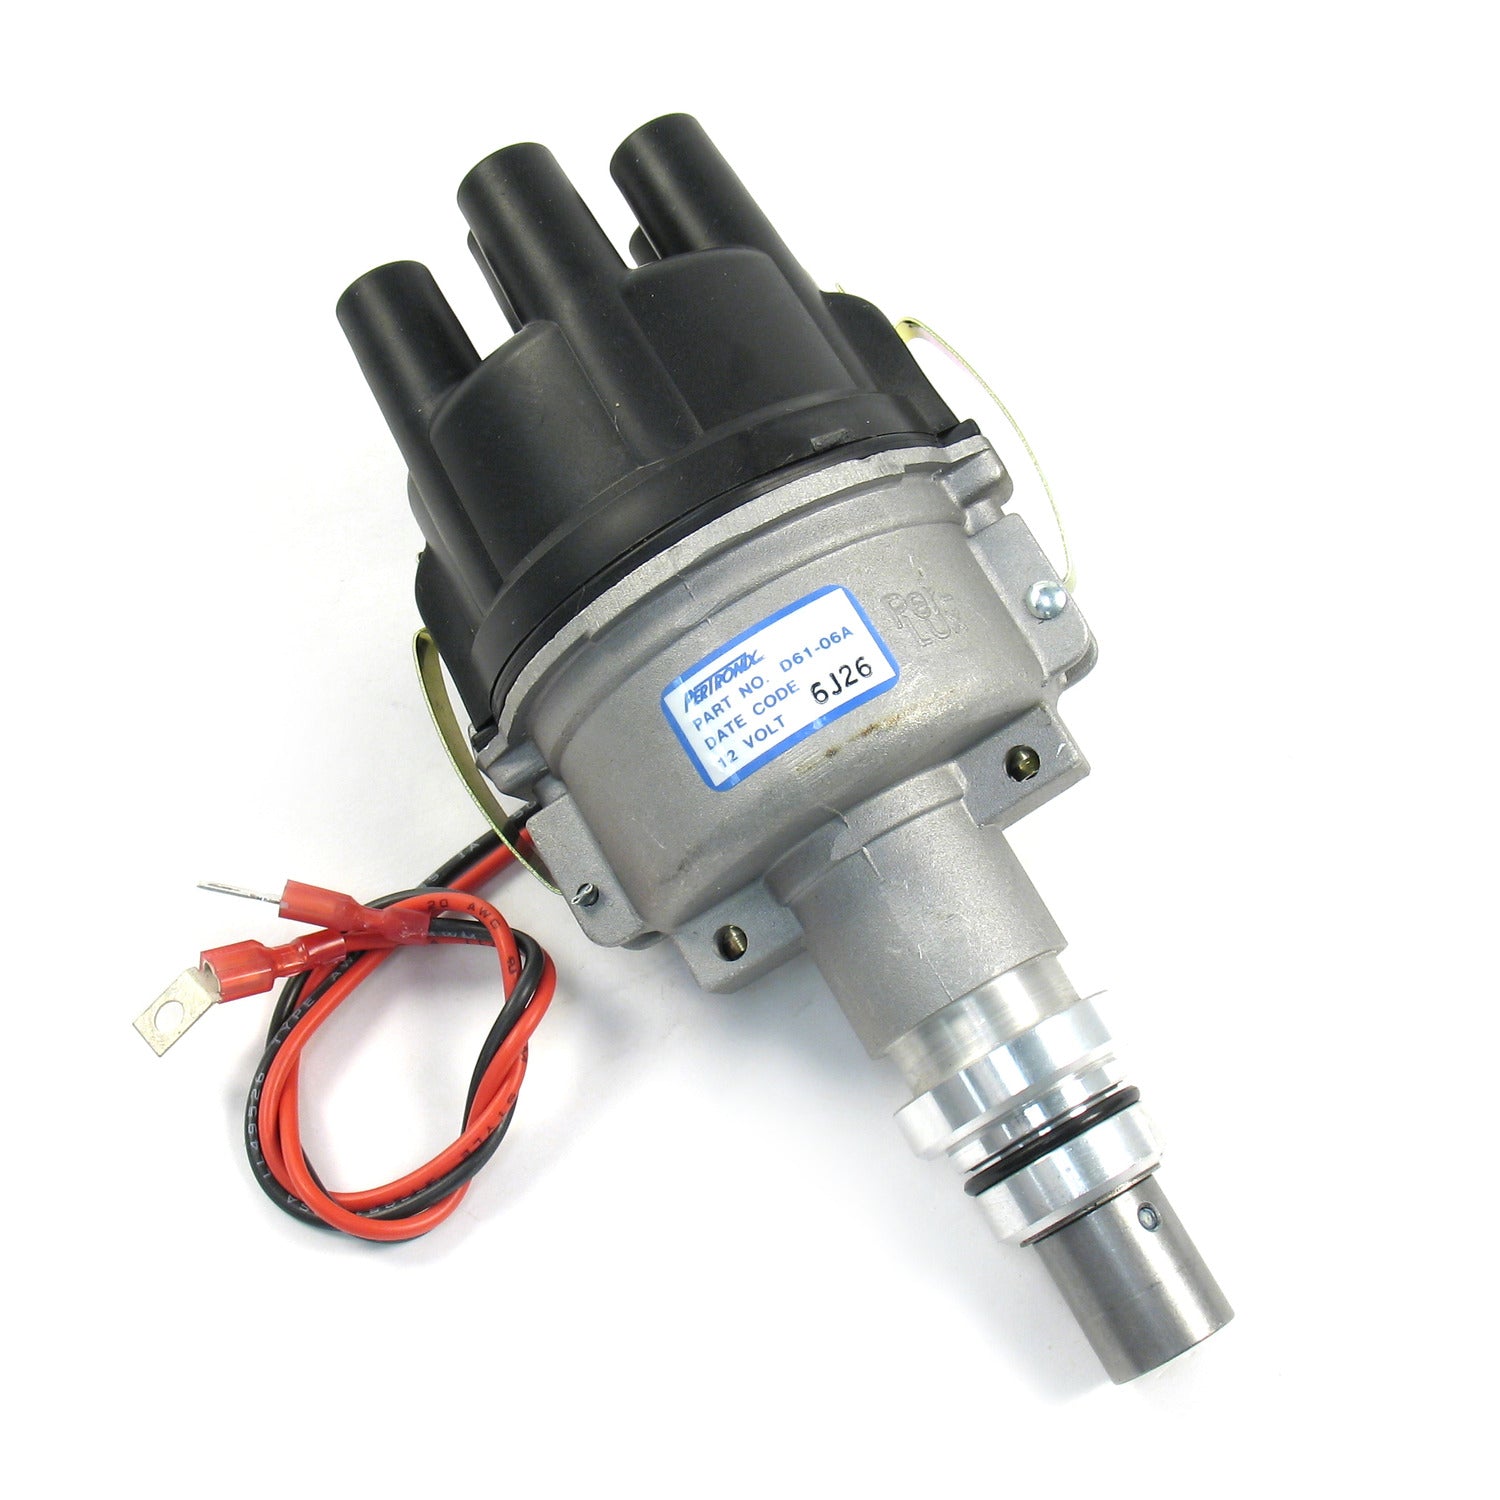 PerTronix D61-06A Distributor Industrial Continental 6 cyl